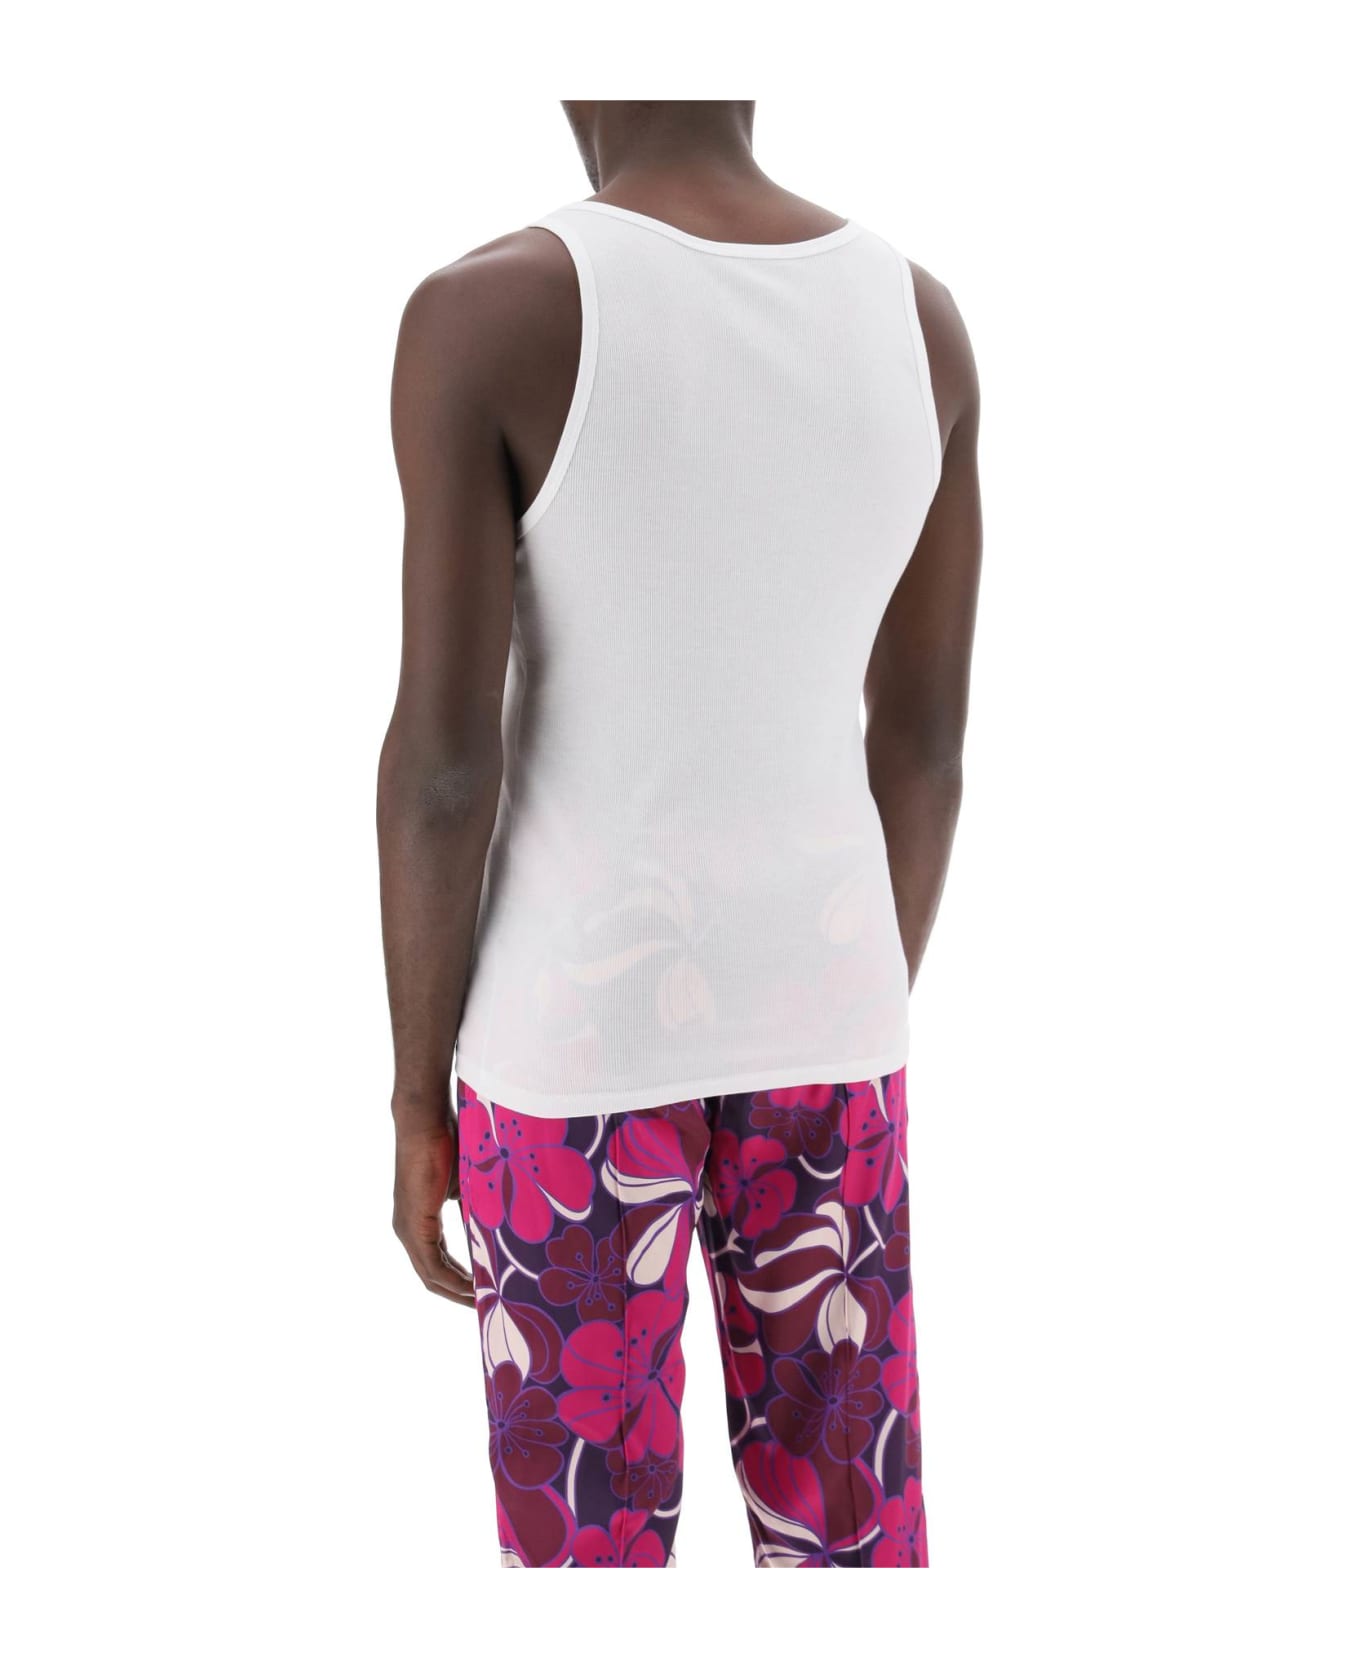 Tom Ford White Cotton And Modal Tank Top - BIANCO (White)